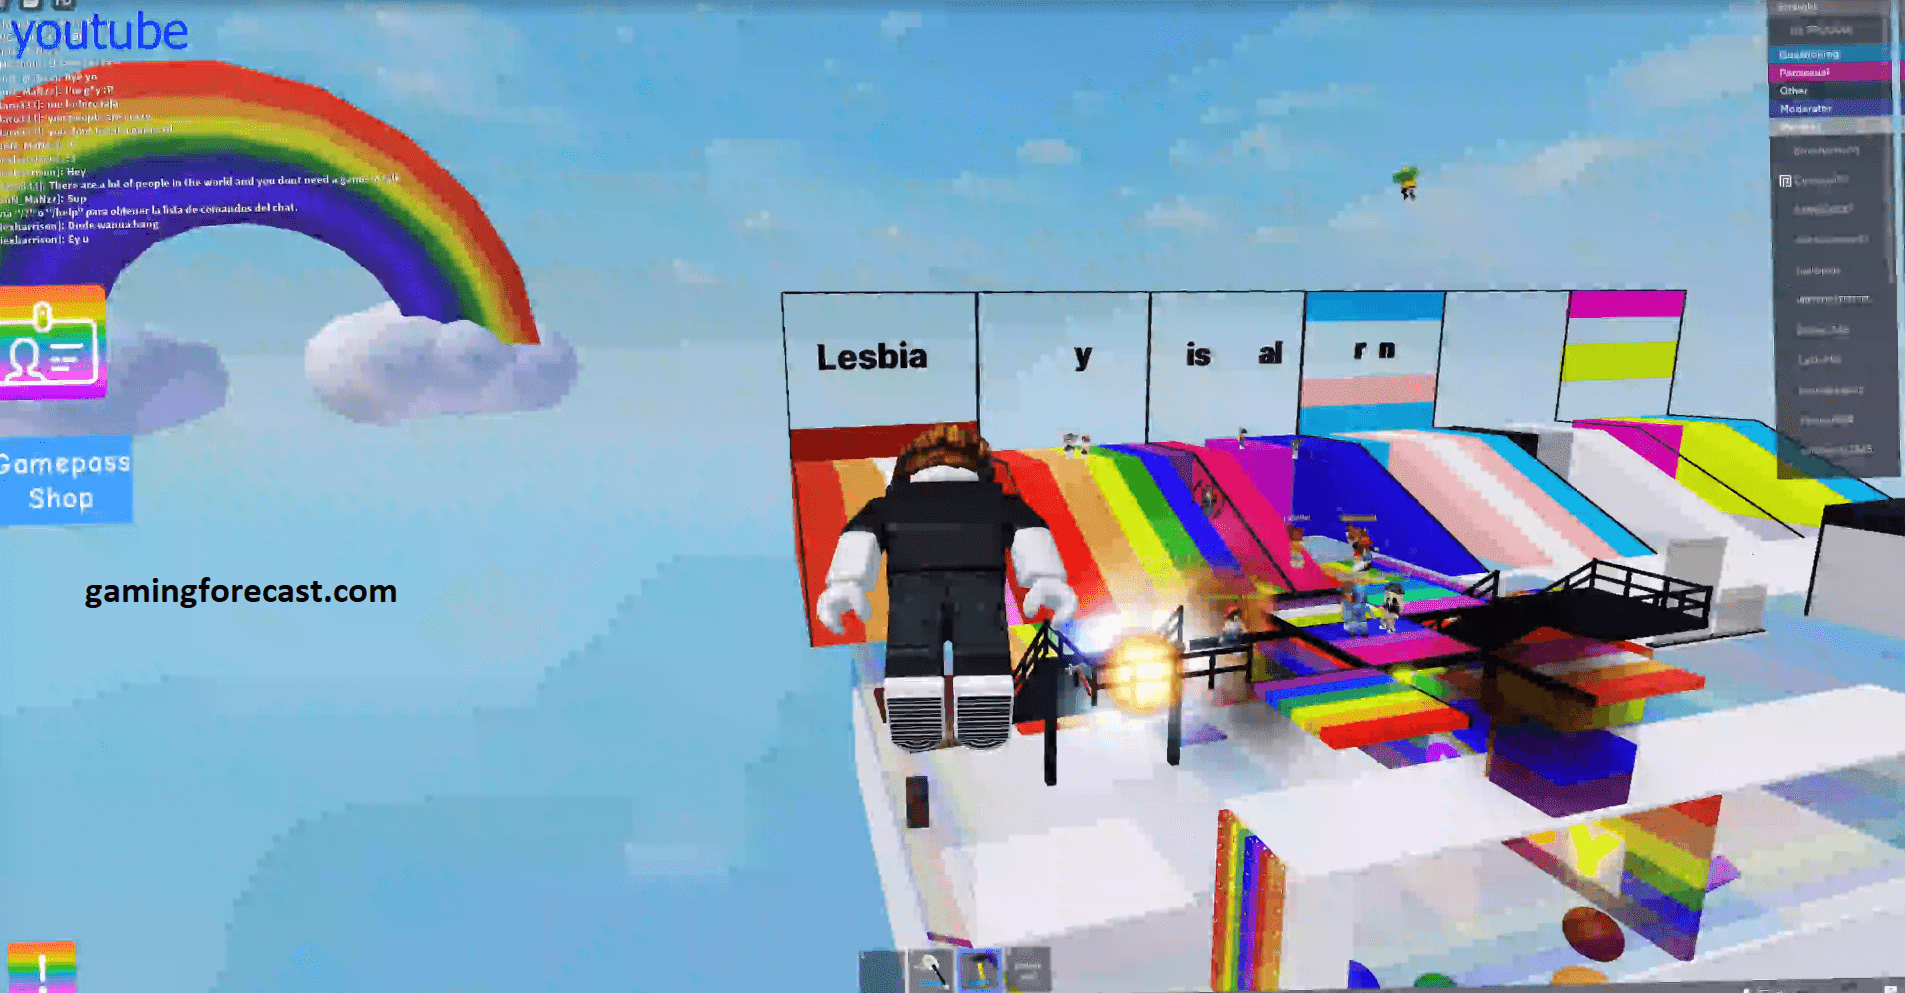 Roblox Hack Download Pc Destroy Lobby Fly Aimbot Scripts 2021 Gaming Forecast Download Free Online Game Hacks - roblox crosshair cs go